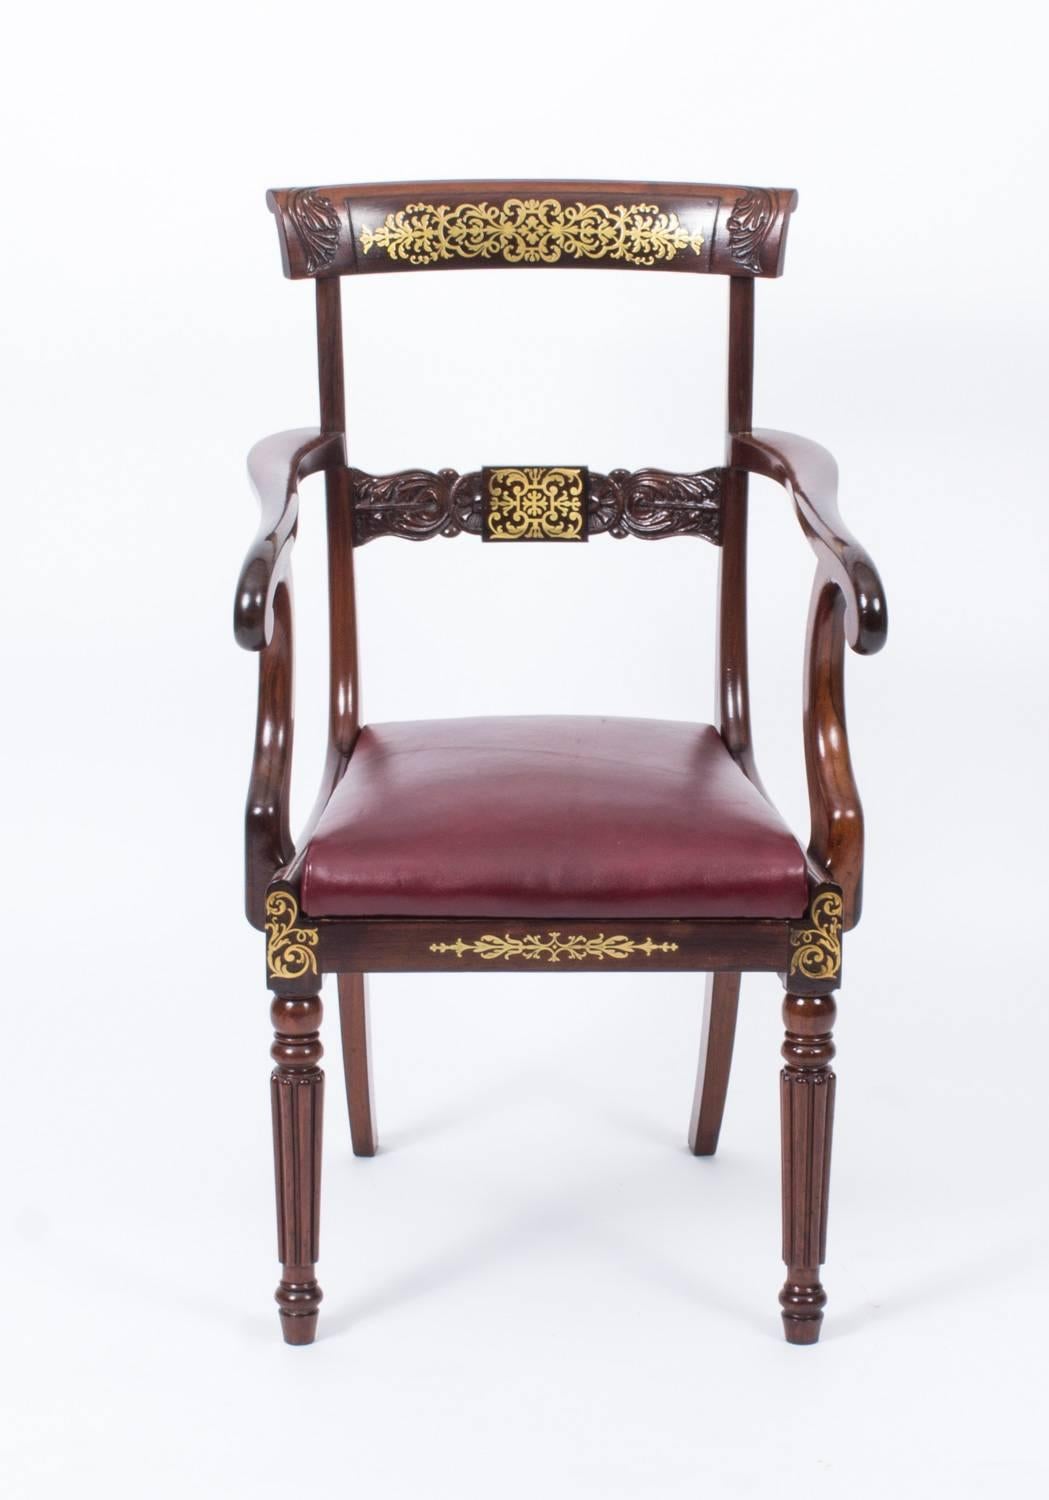 This is an elegant antique Regency mahogany and cut brass marquetry elbow chair, circa 1815 in date.

It has a beautiful curved cresting rail and a central bar profusely inlaid and carved with acanthus, and the pair of downswept arms have elegant